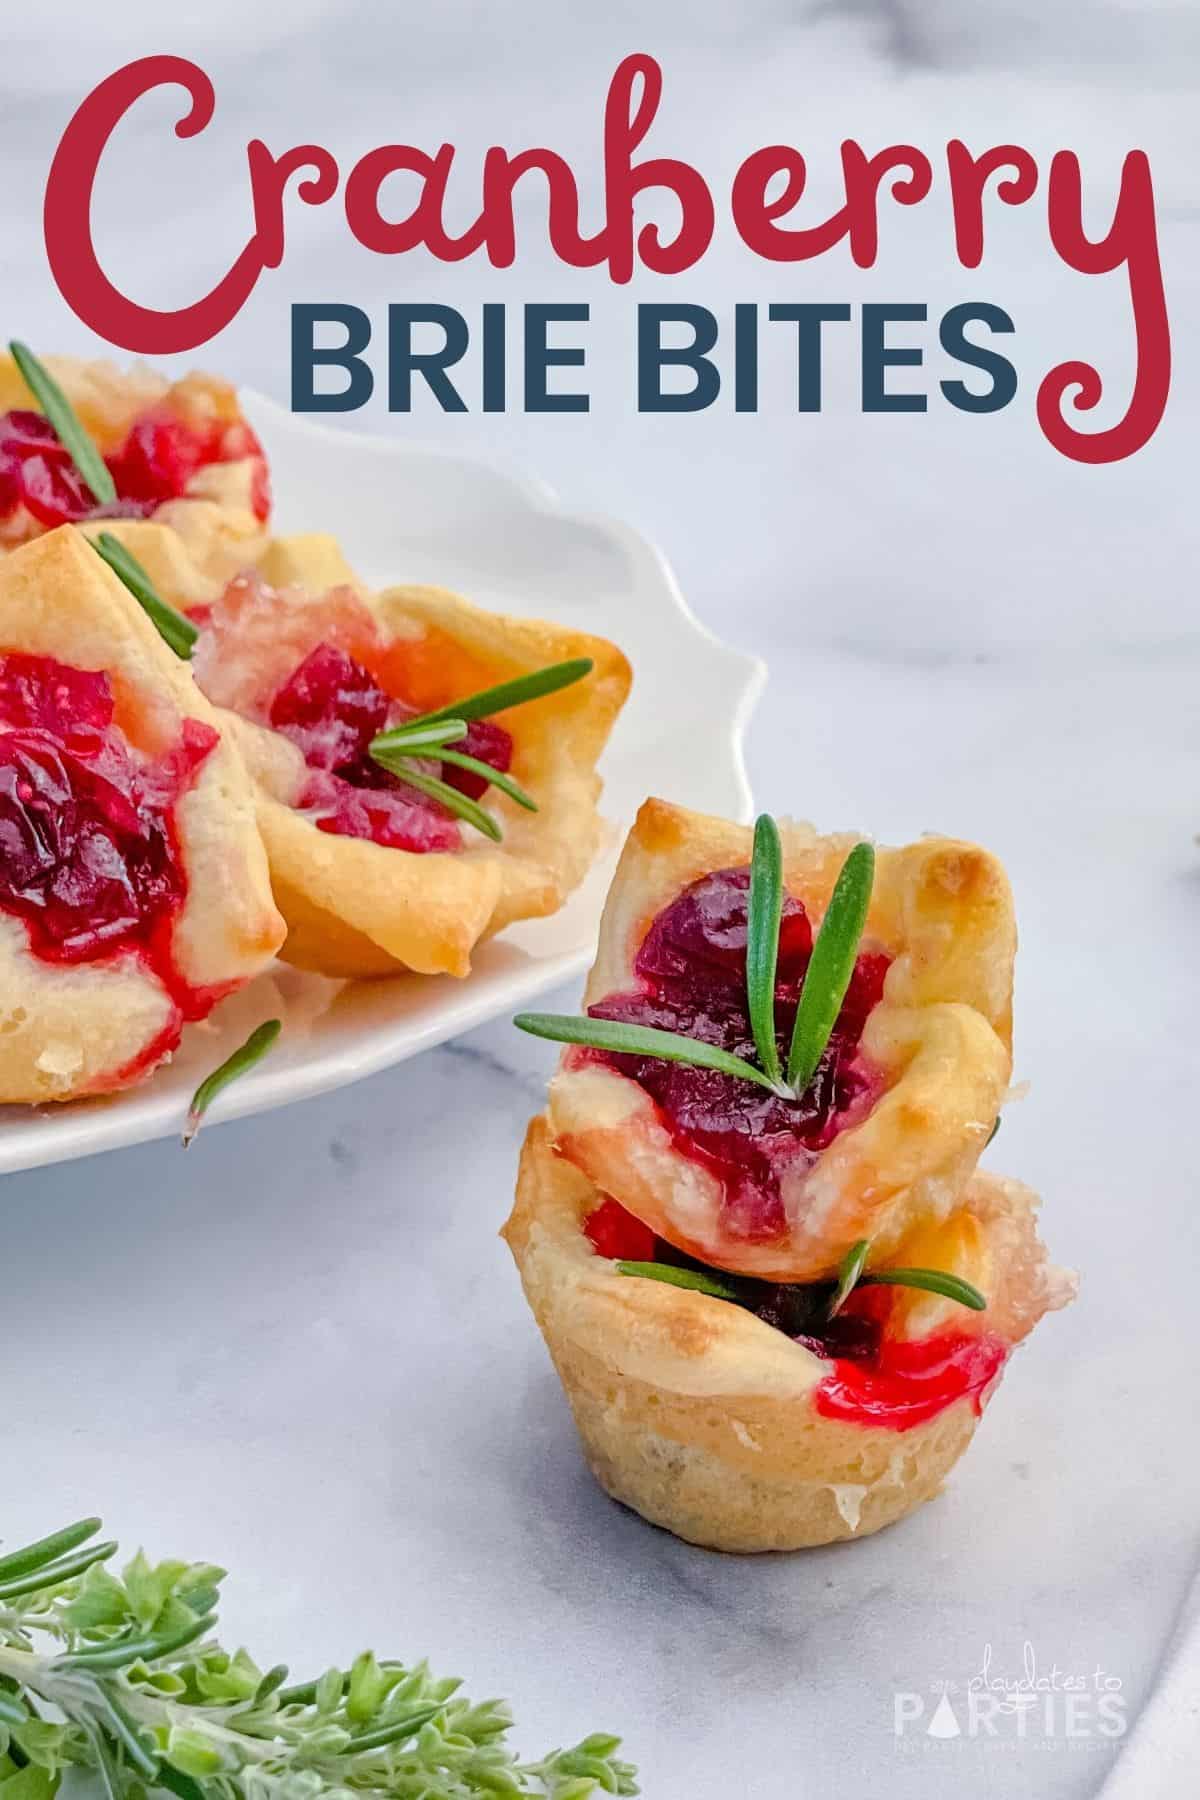 Cranberry brie bites stacked on a marble surface with a plate of brie bites in the background.